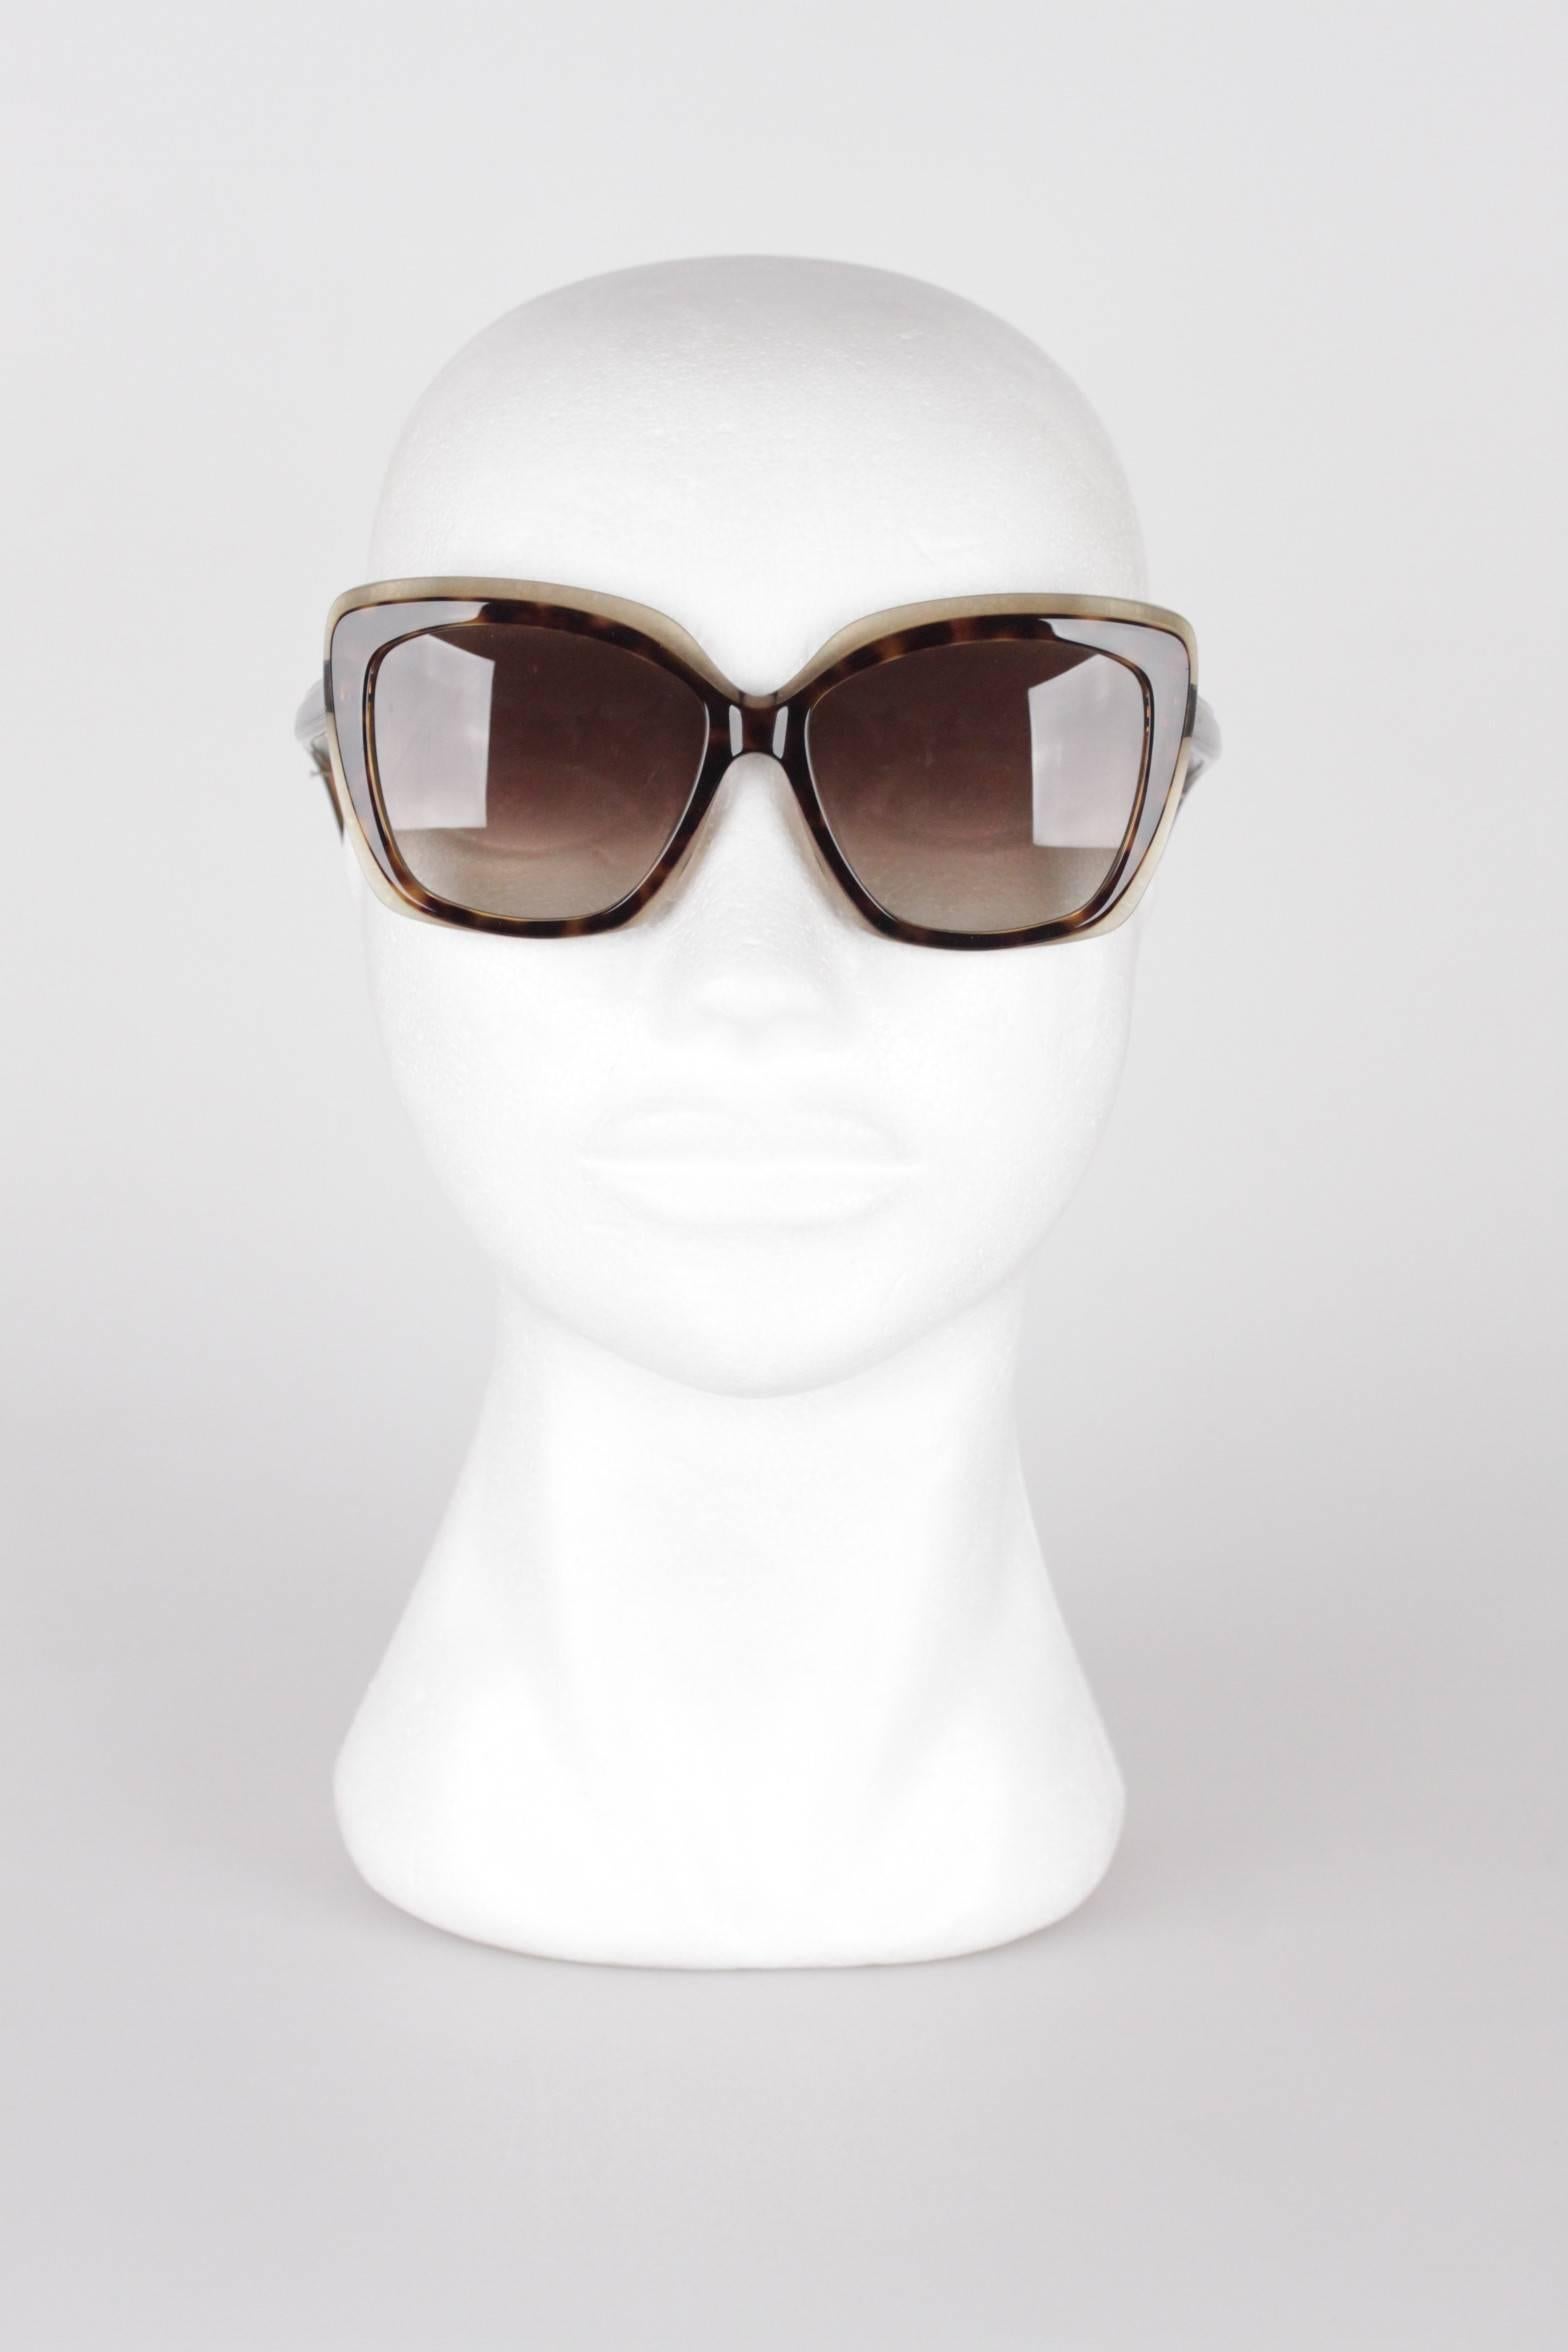 EMILIO PUCCI Brown OVERSIZED Sunglasses EP720S 57/16 244 NEW, MINT & BOXED 5